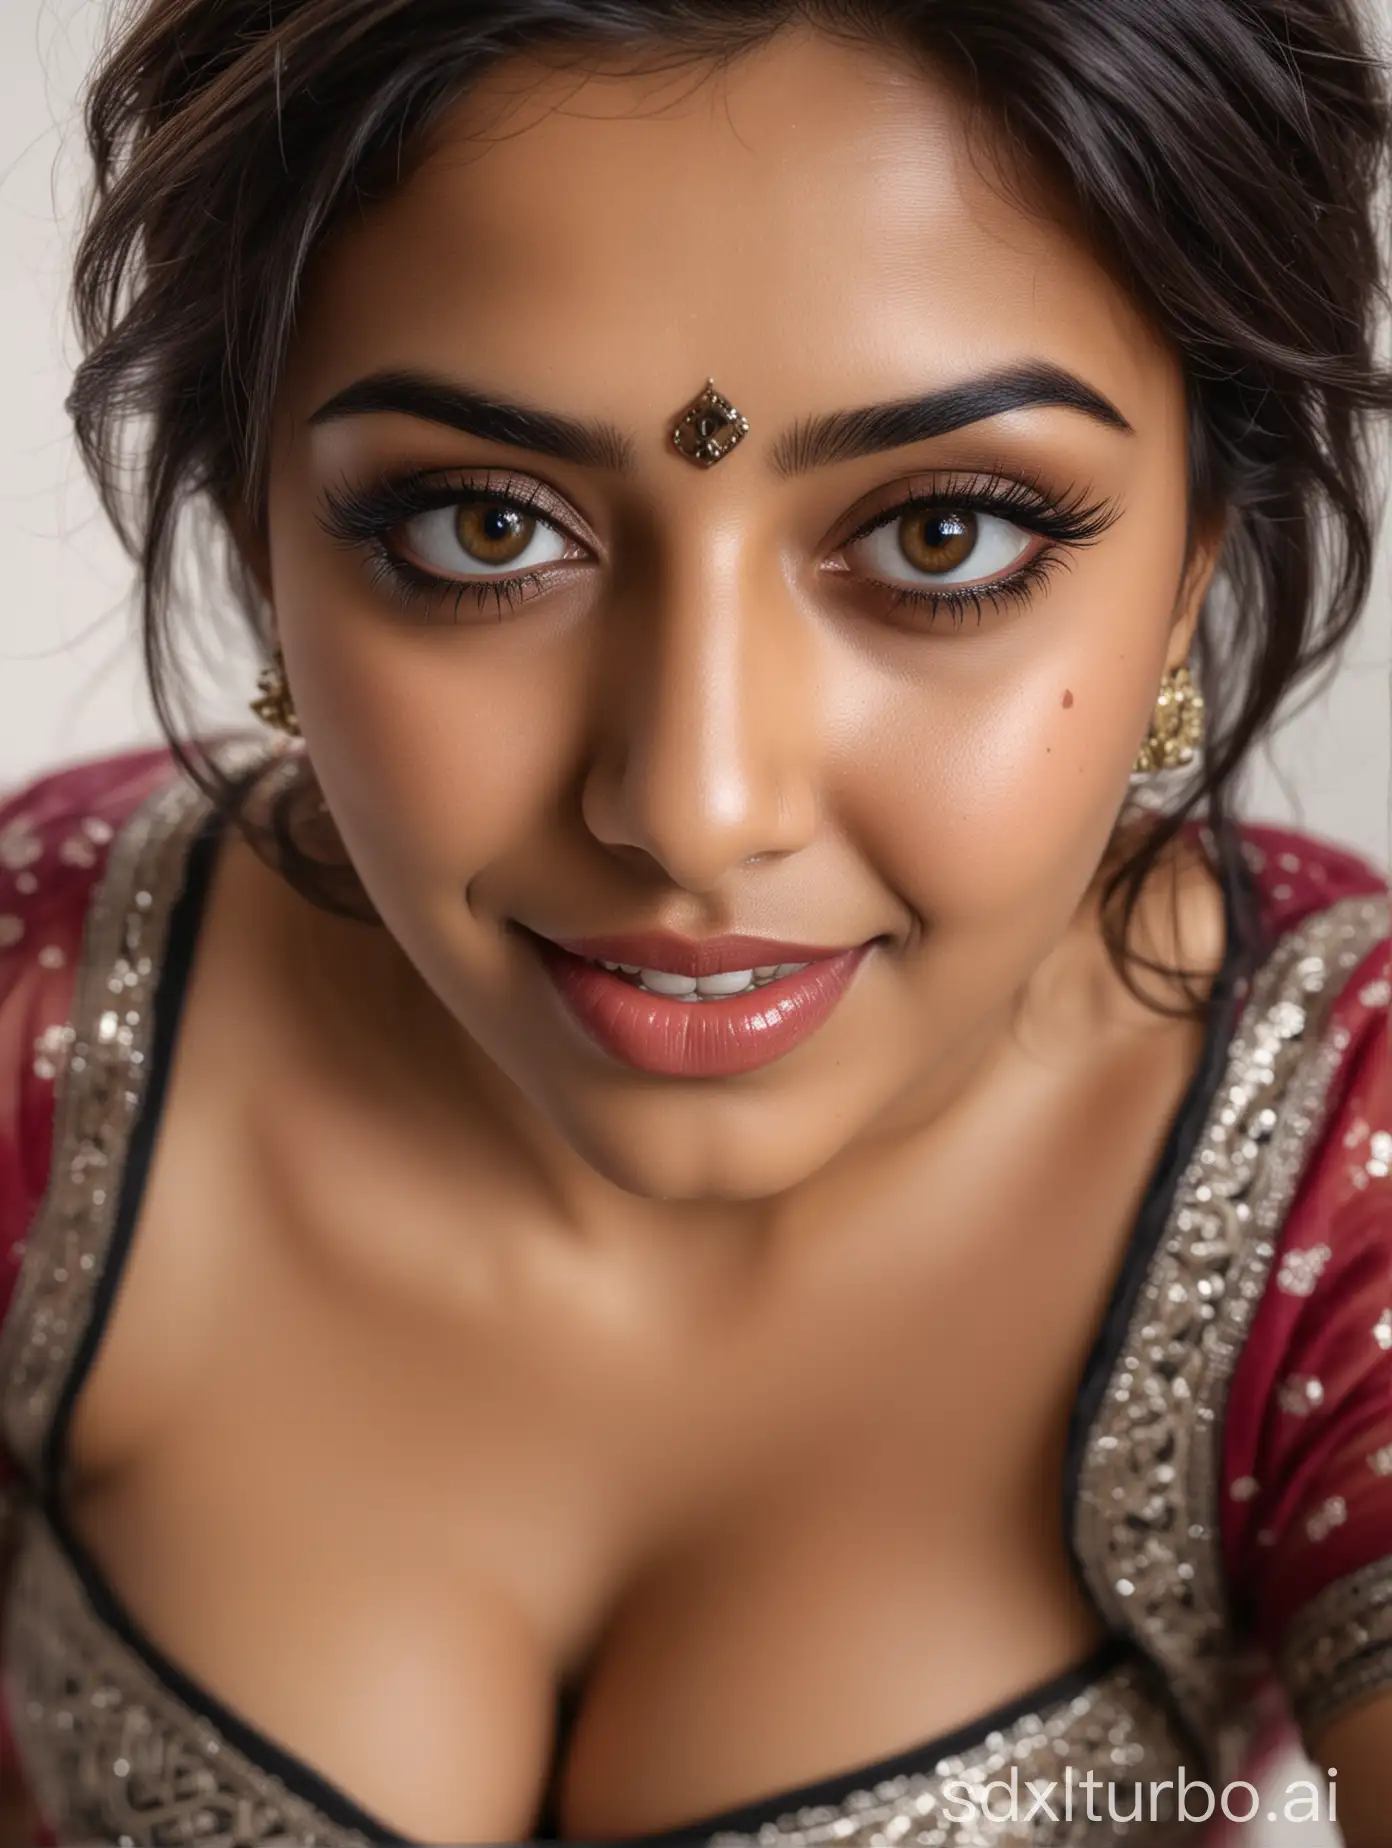 Captivating-Indian-Woman-in-Transparent-Saree-Stunning-35YearOld-Beauty-in-Natural-Light